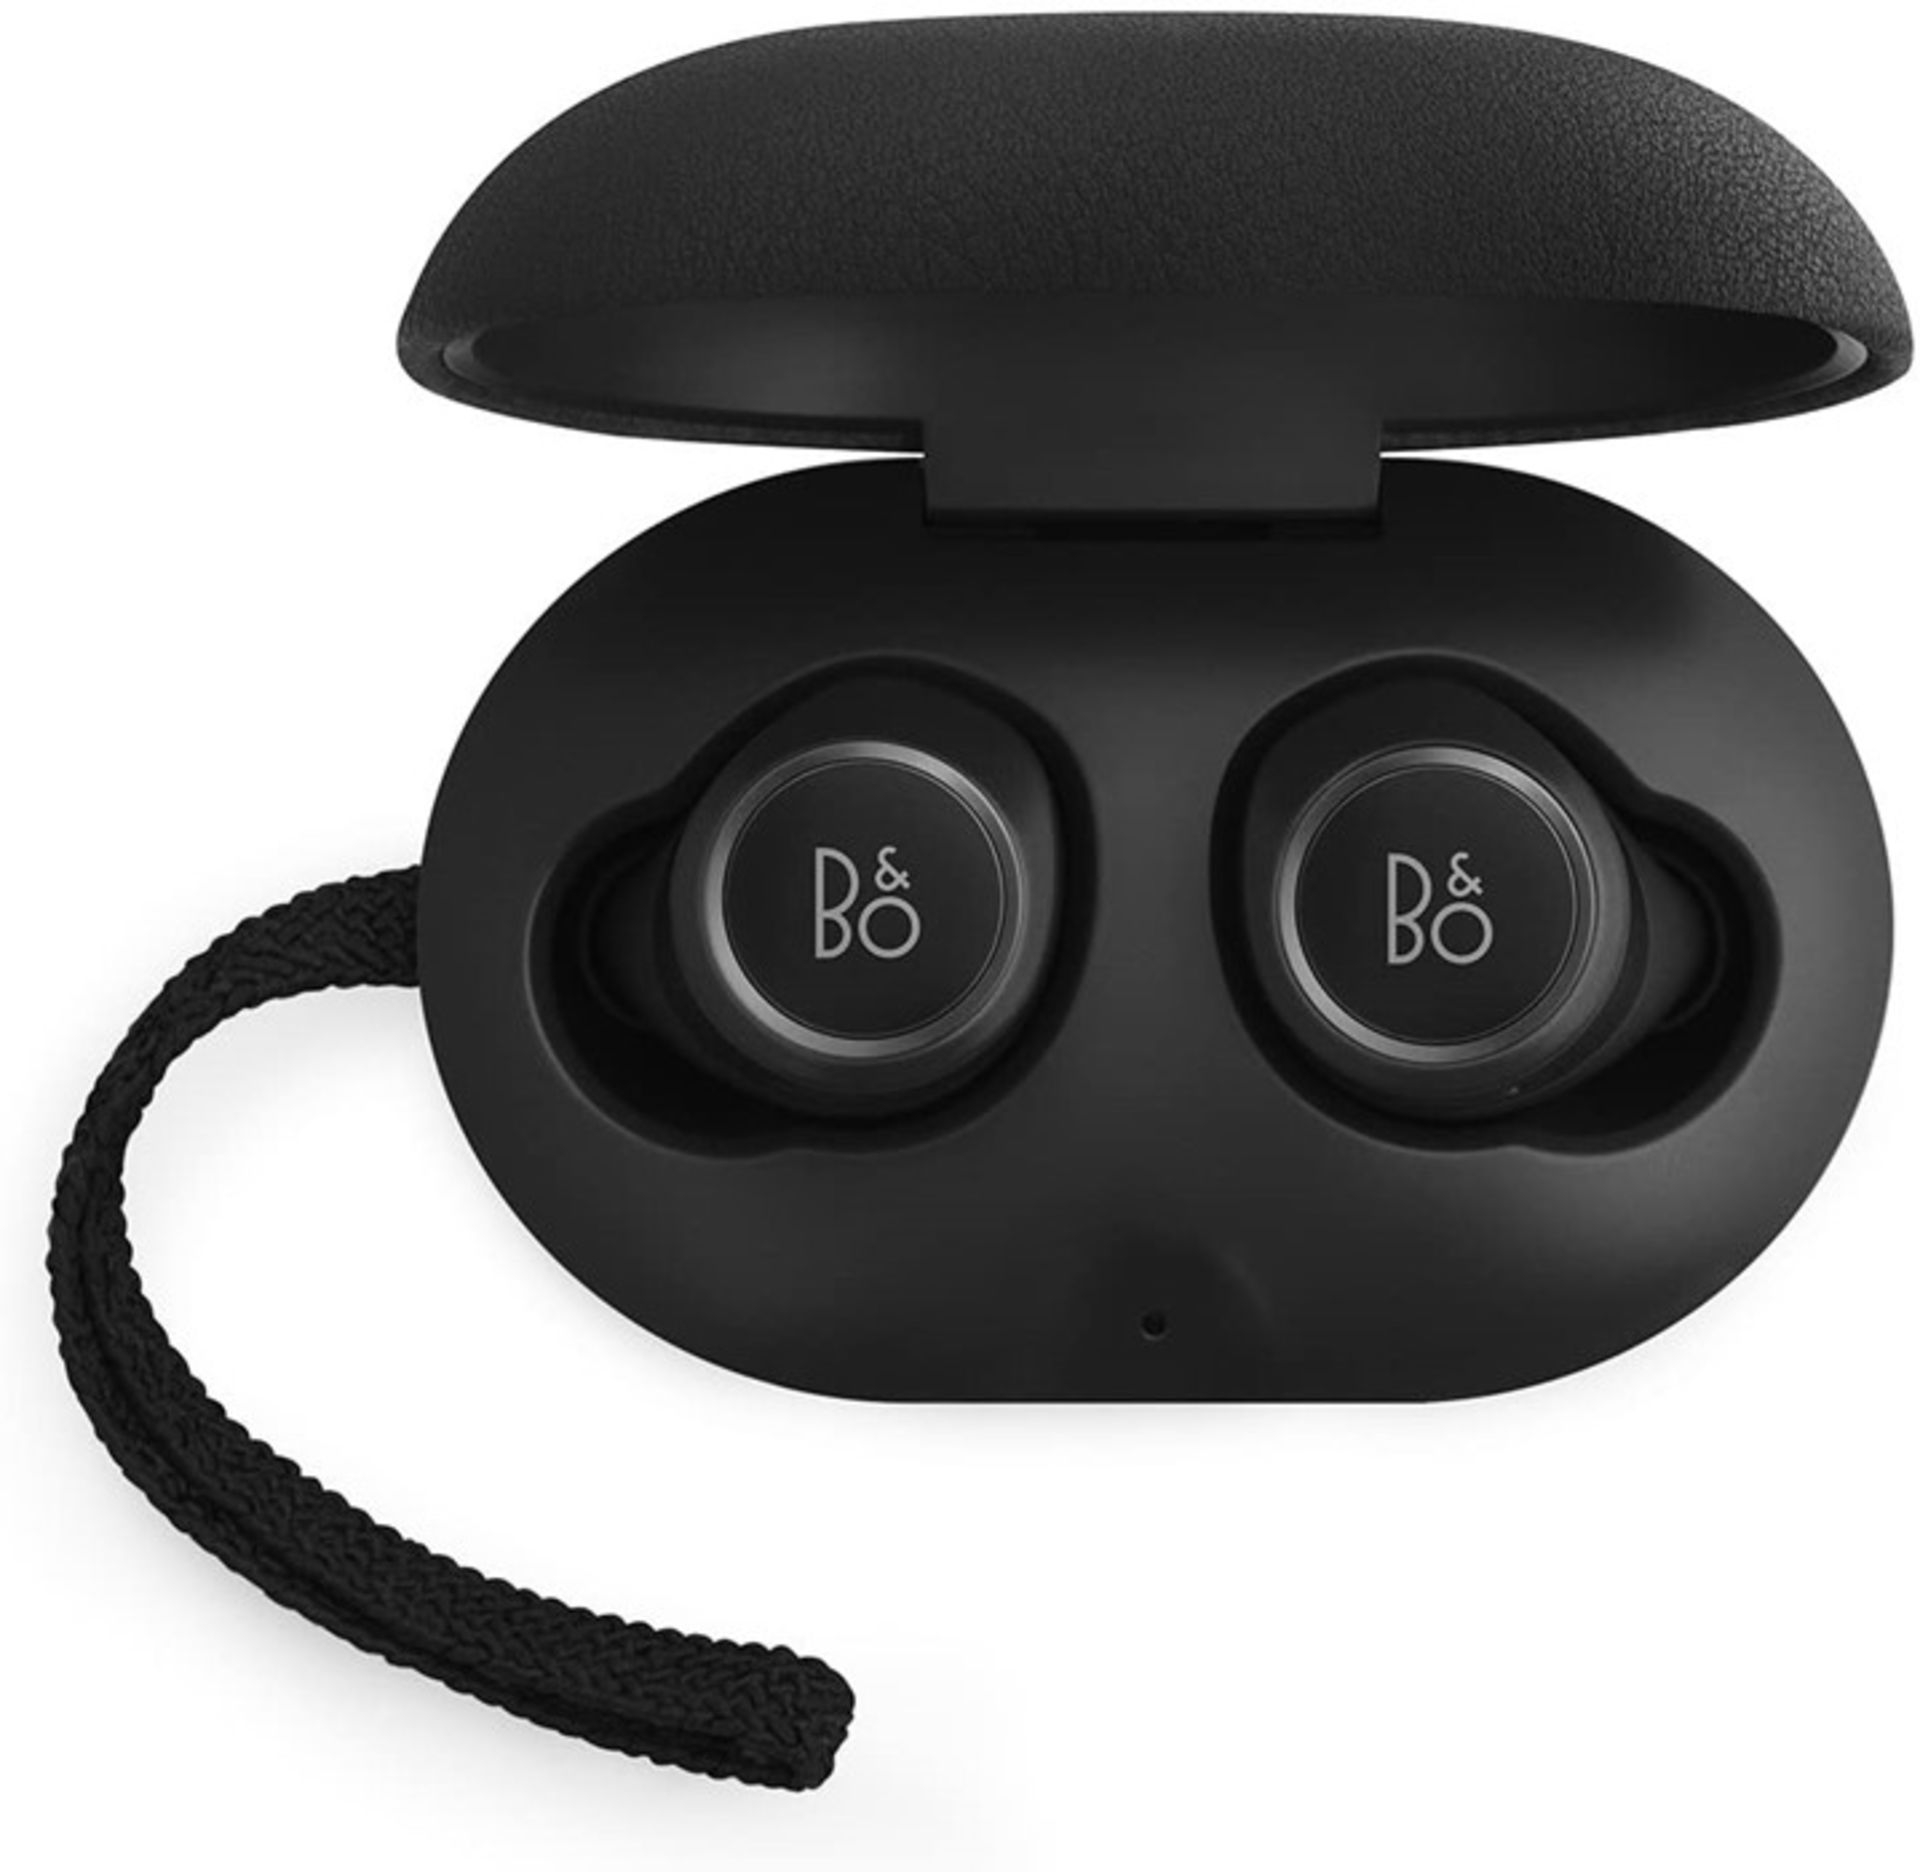 1 x set of Black Bang and Olufsen E8 wireless earphones, boxed and brand new, Collection - Image 2 of 3